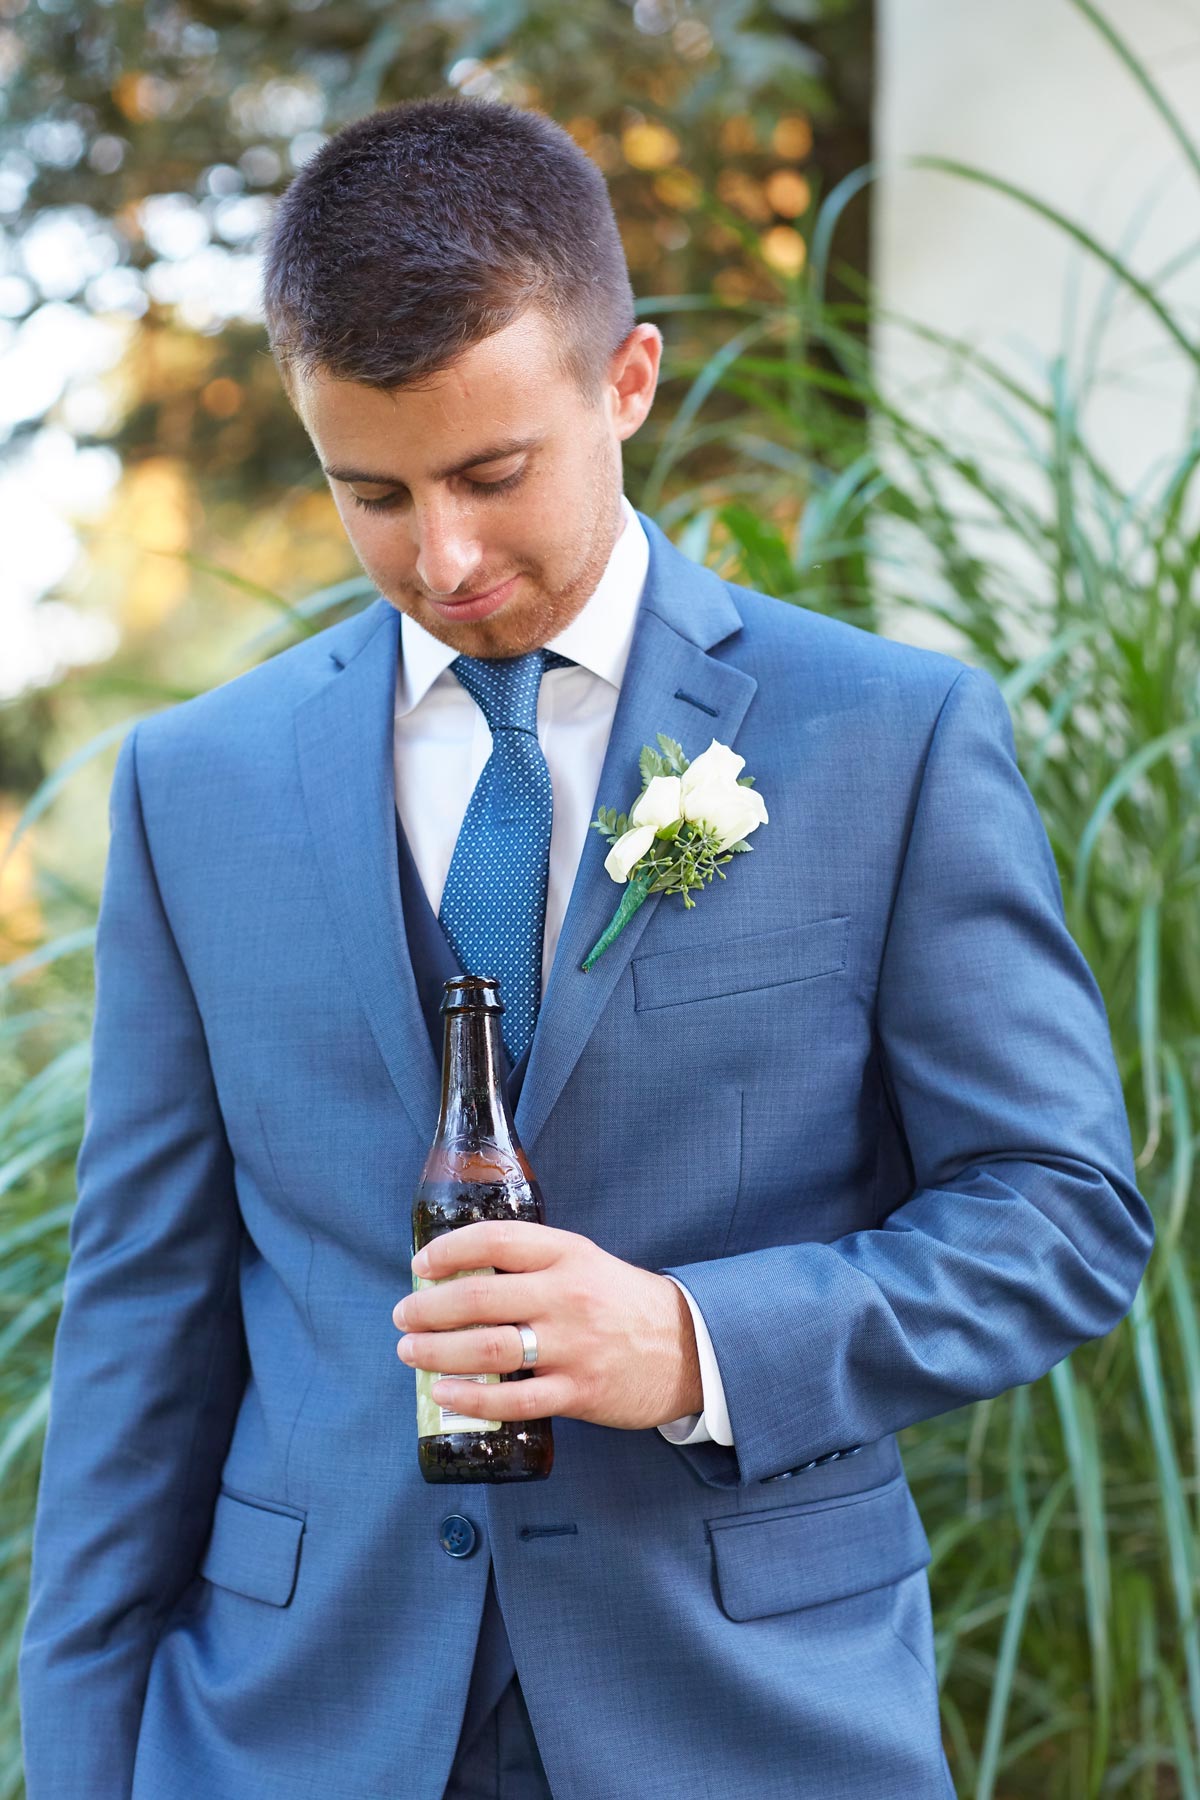 Editorial lifestyle shot of a man in a blue suit with a boutonniere